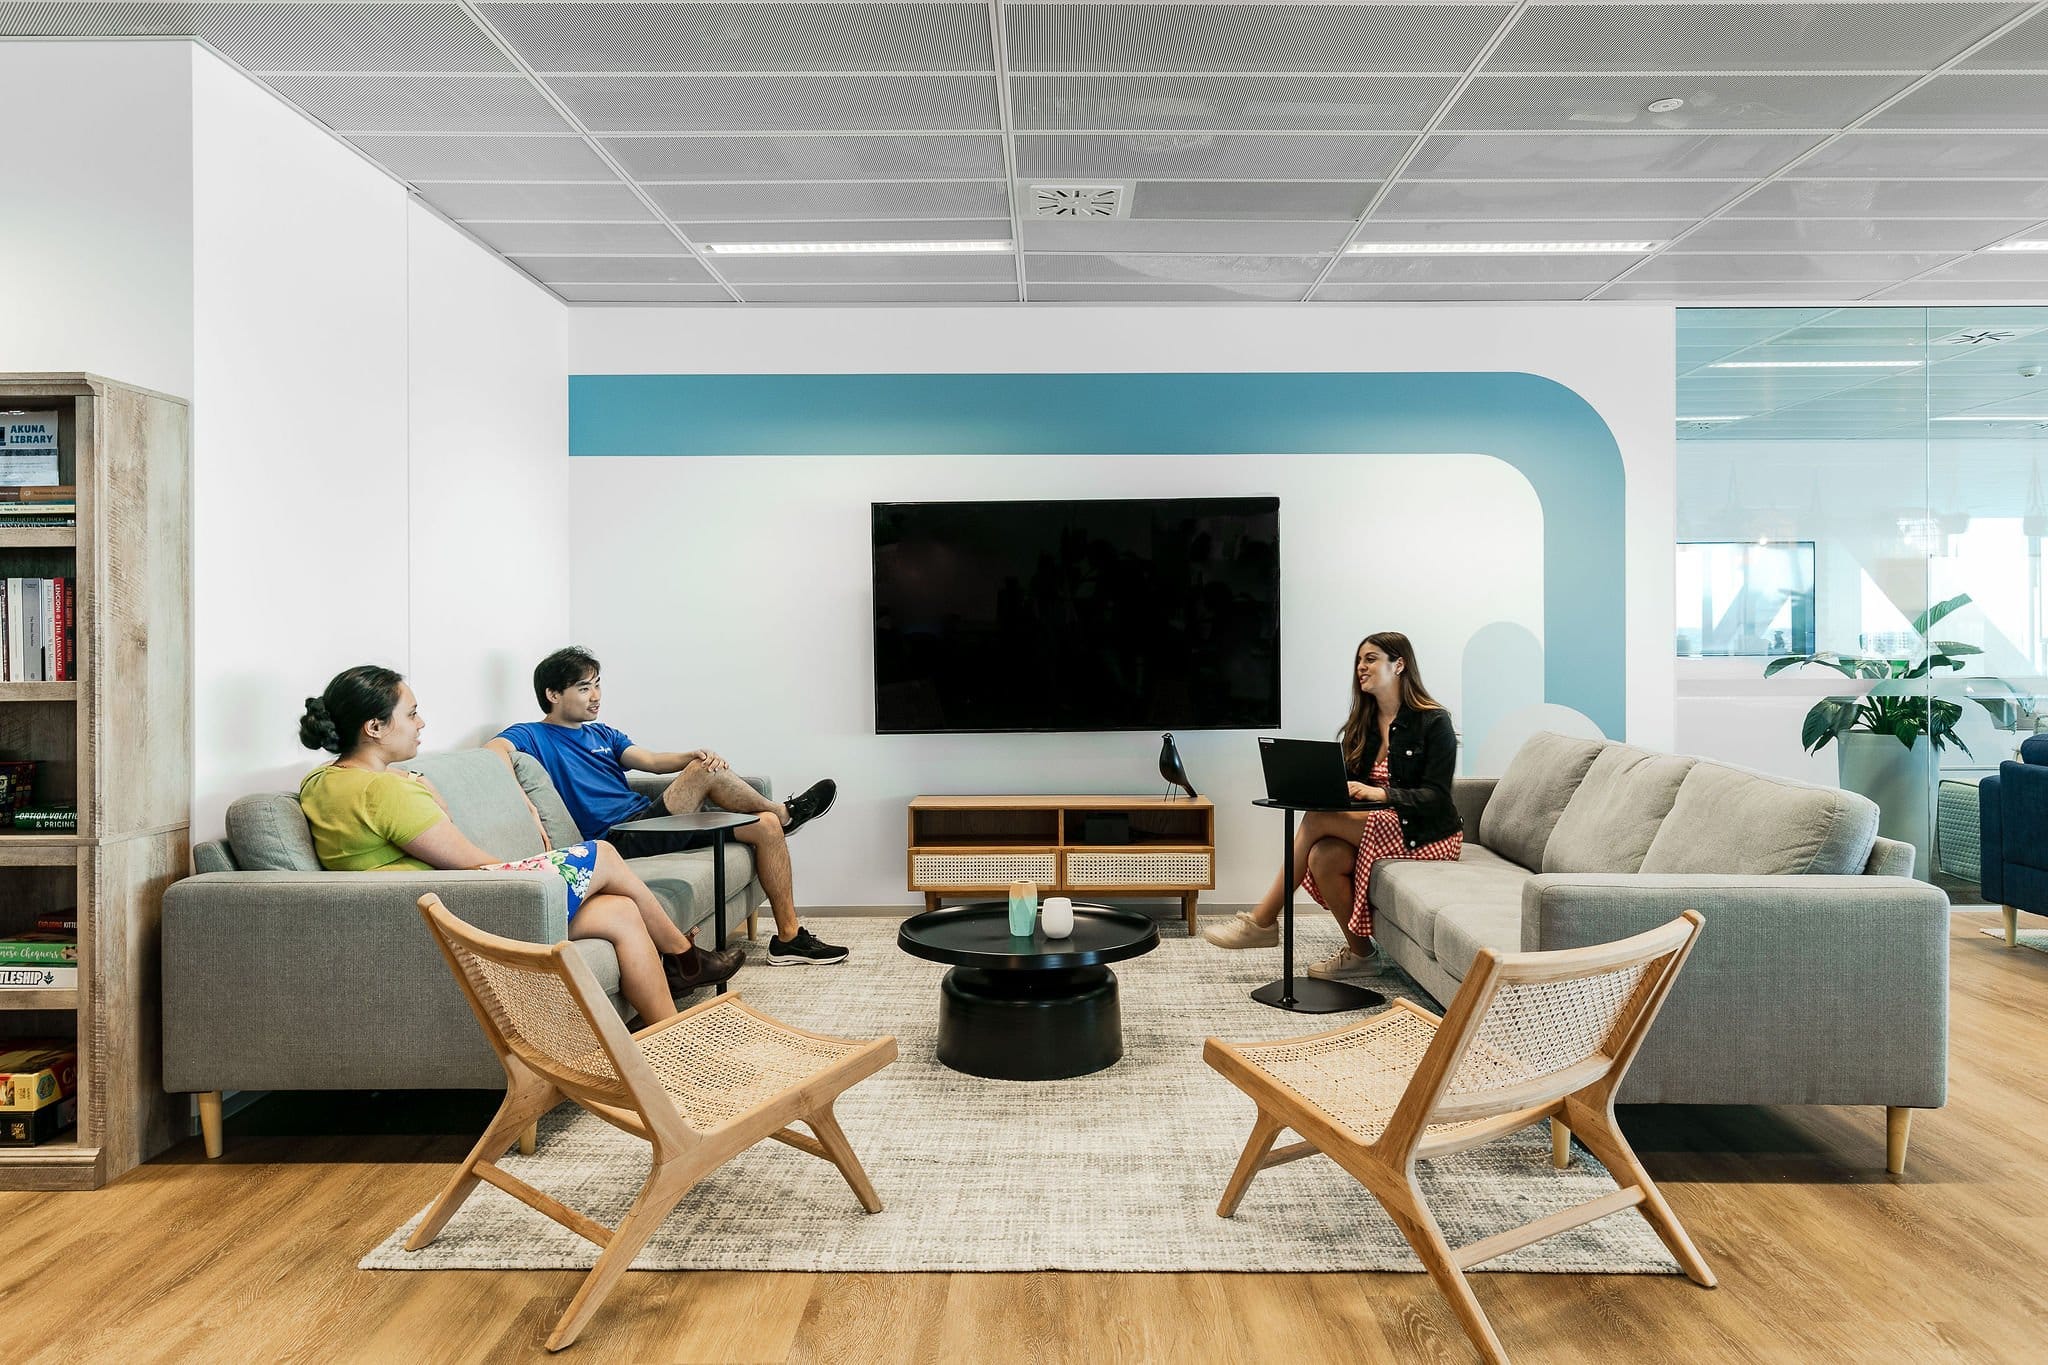 Akuna Capital meeting area designed by Axiom Workplaces